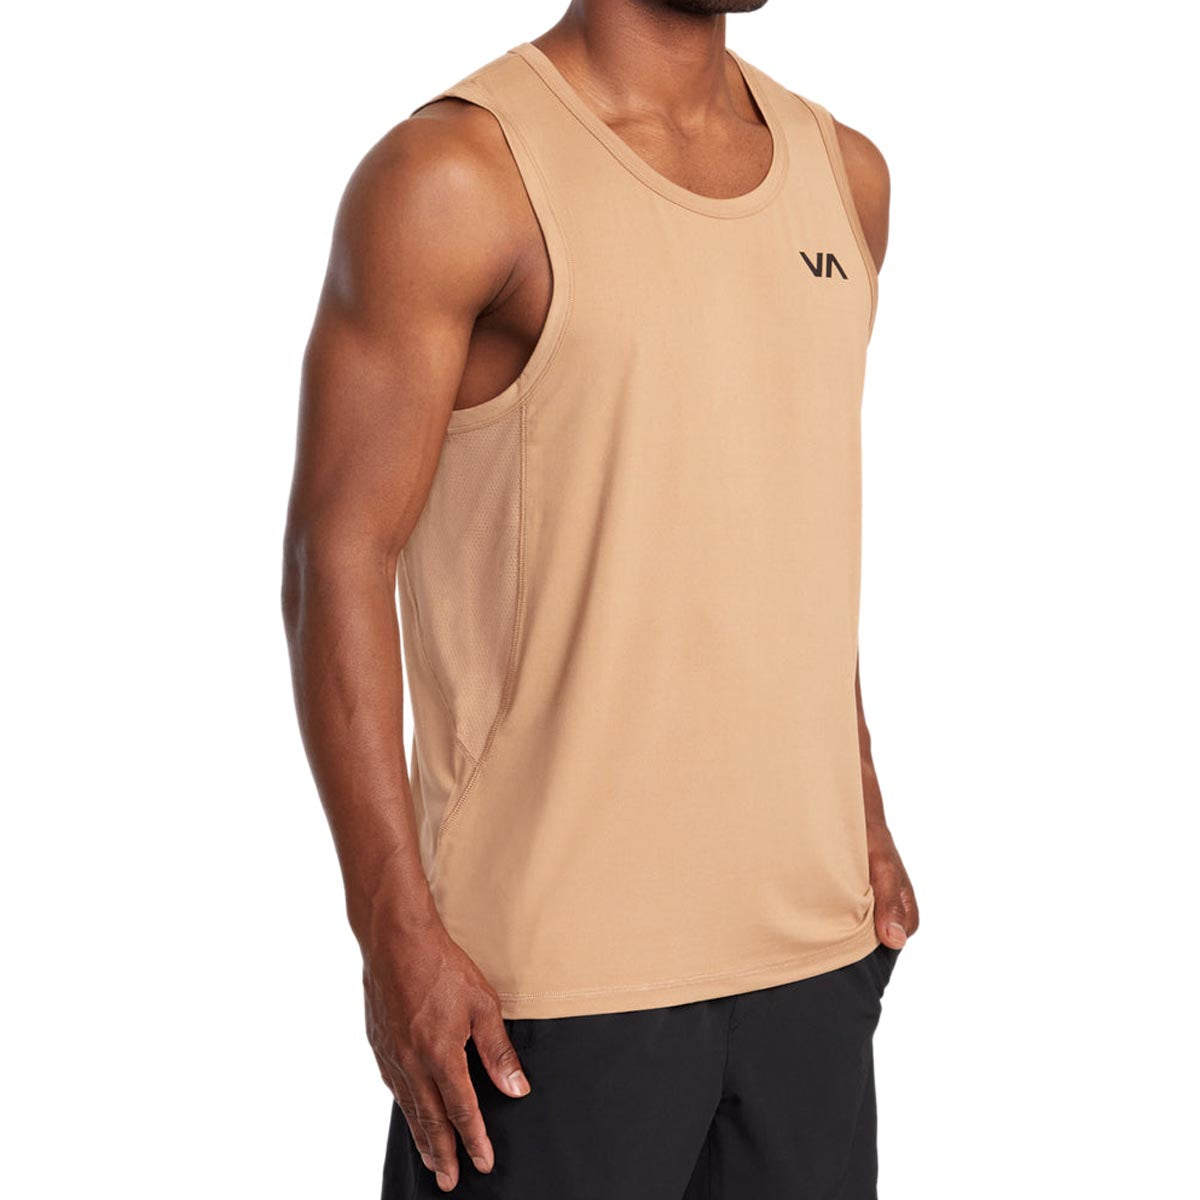 RVCA Sport Vent Sleeve Tank Top - Earth Clay image 4